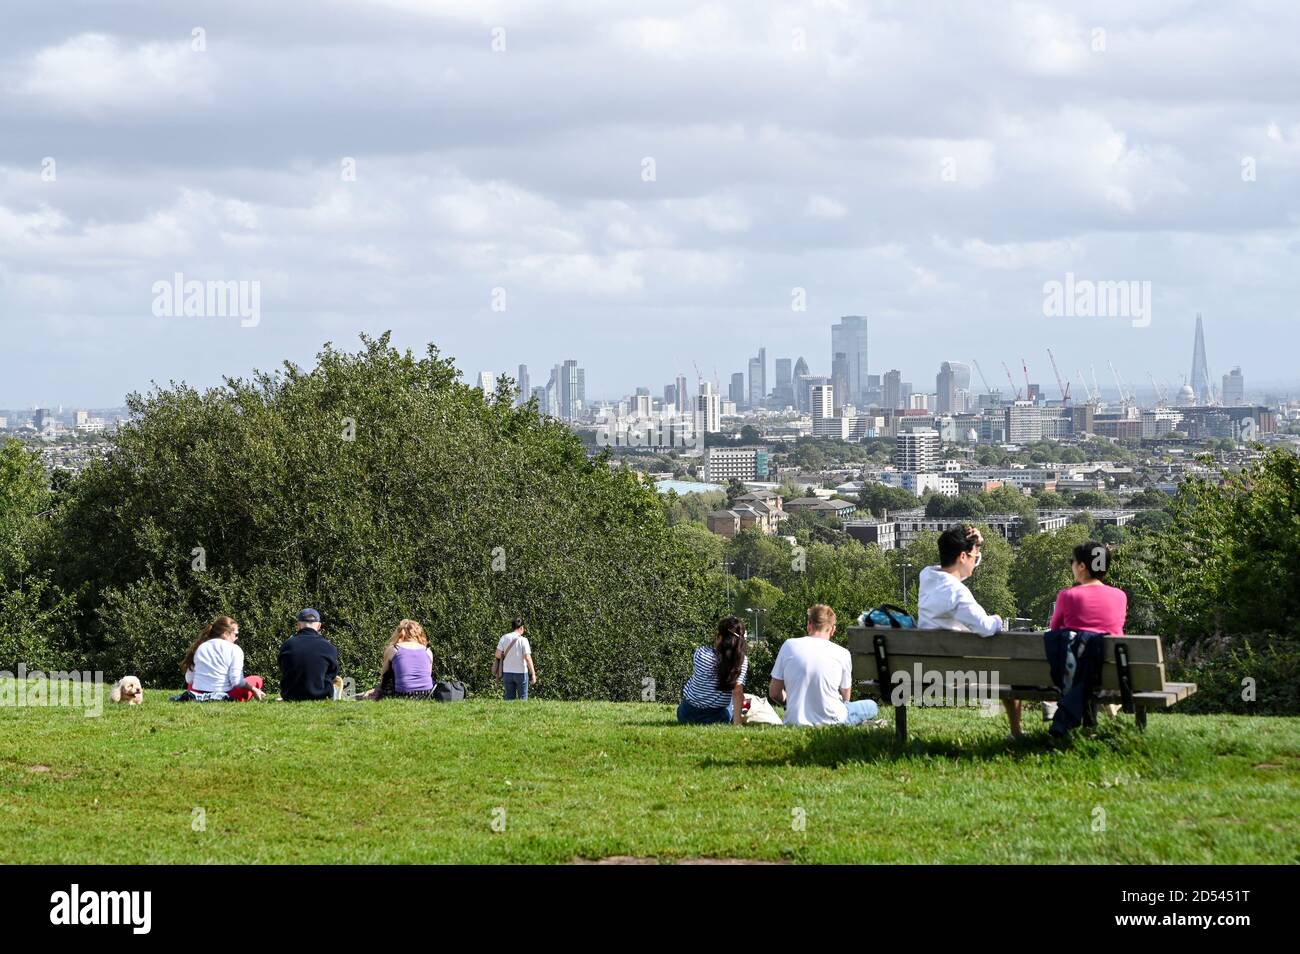 People chatting in small groups on Parliament Hill, London UK, with a view of London city sky line. Stock Photo